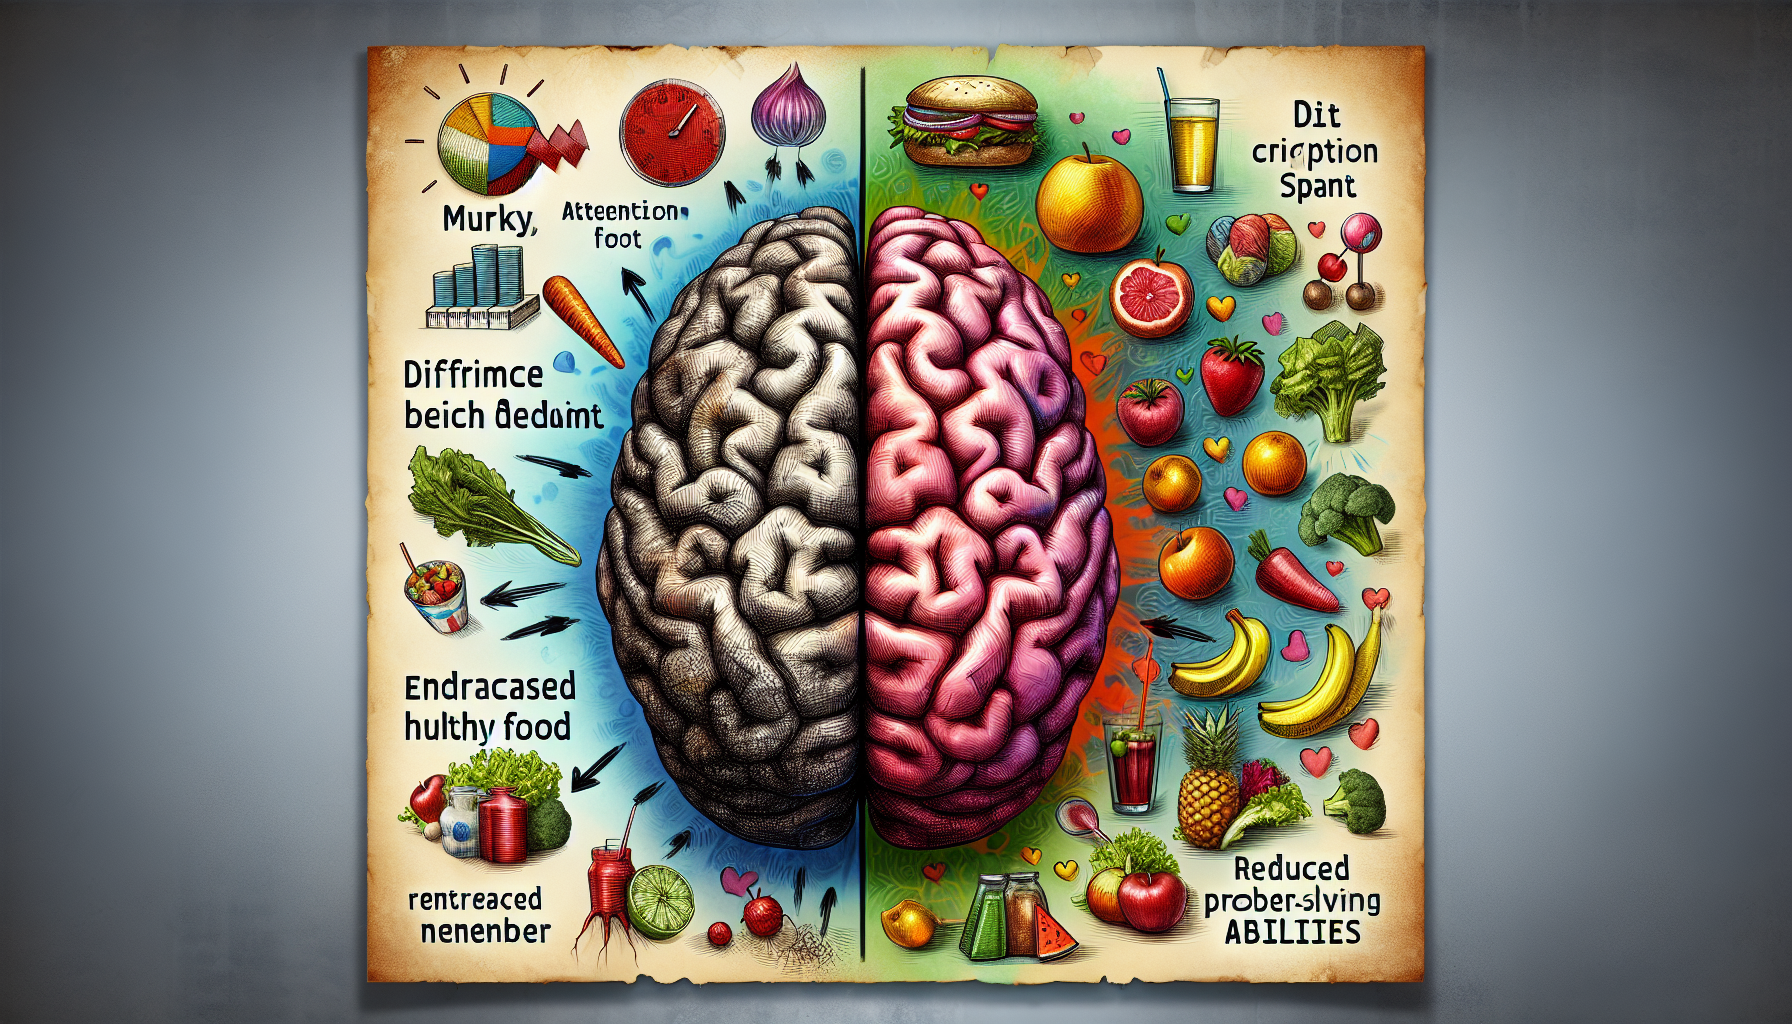 Does A Bad Diet Affect Cognitive Function?